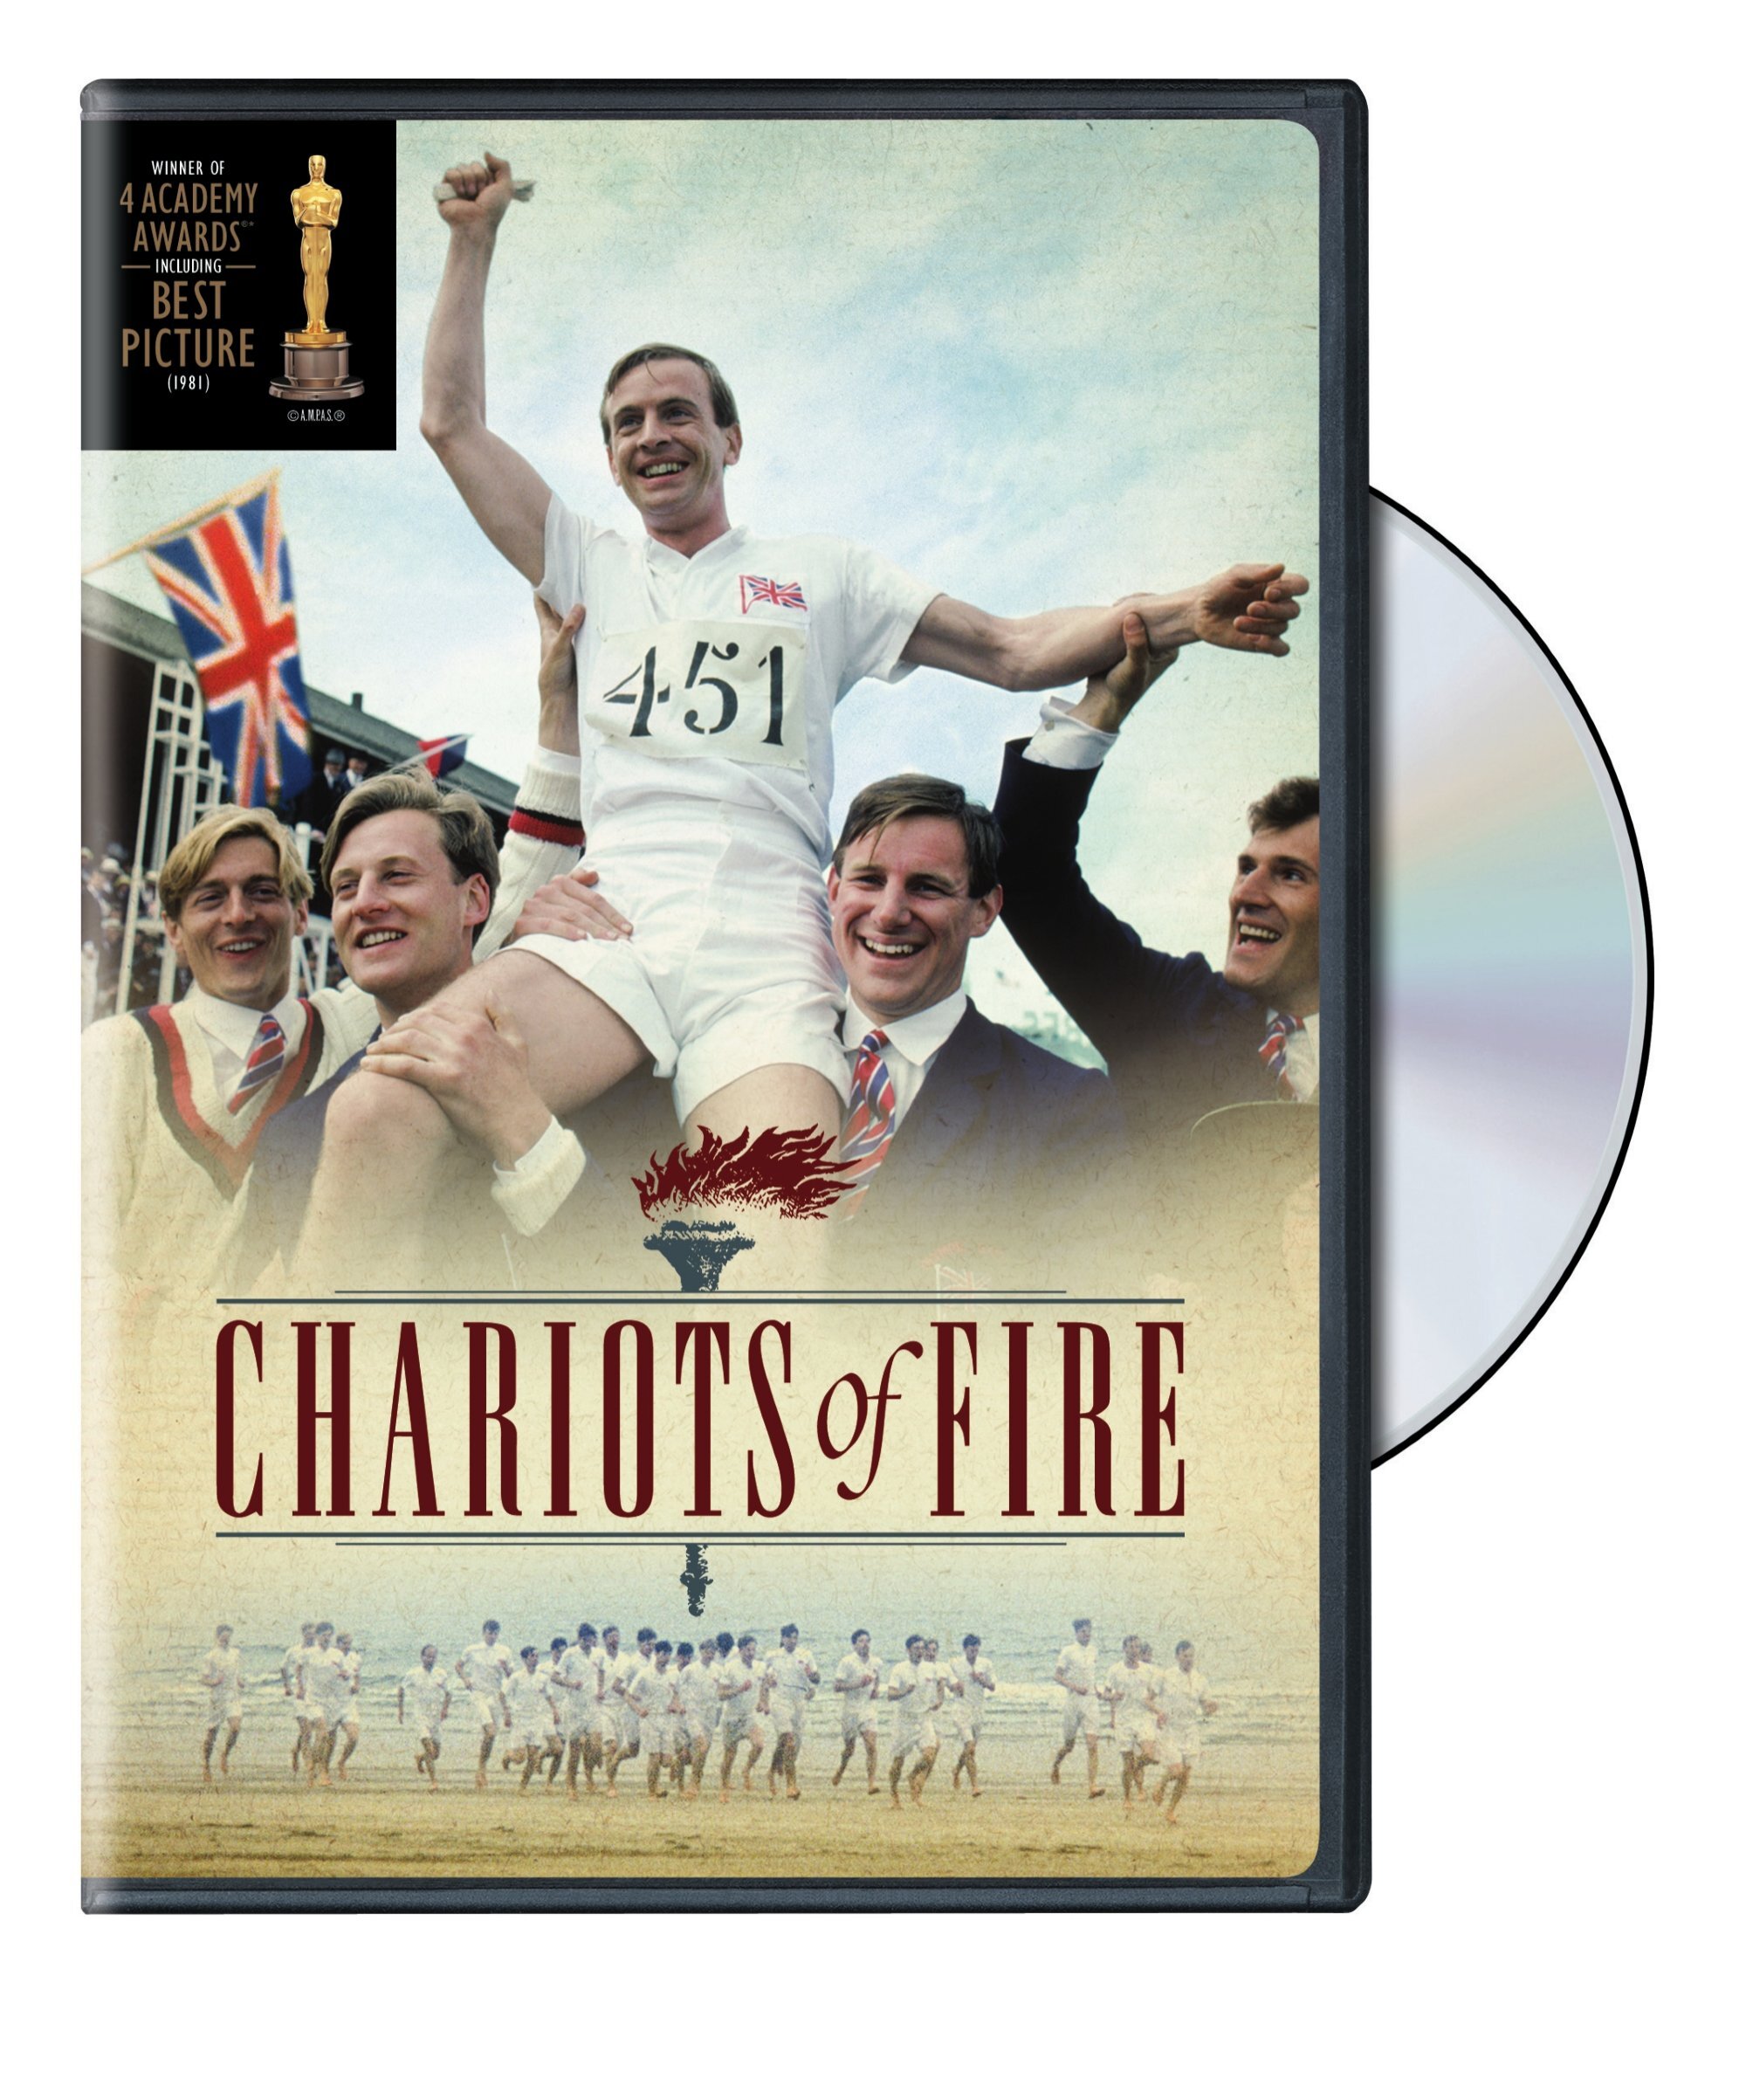 Chariots Of Fire (DVD New Packaging) - DVD [ 1981 ]  - Drama Movies On DVD - Movies On GRUV